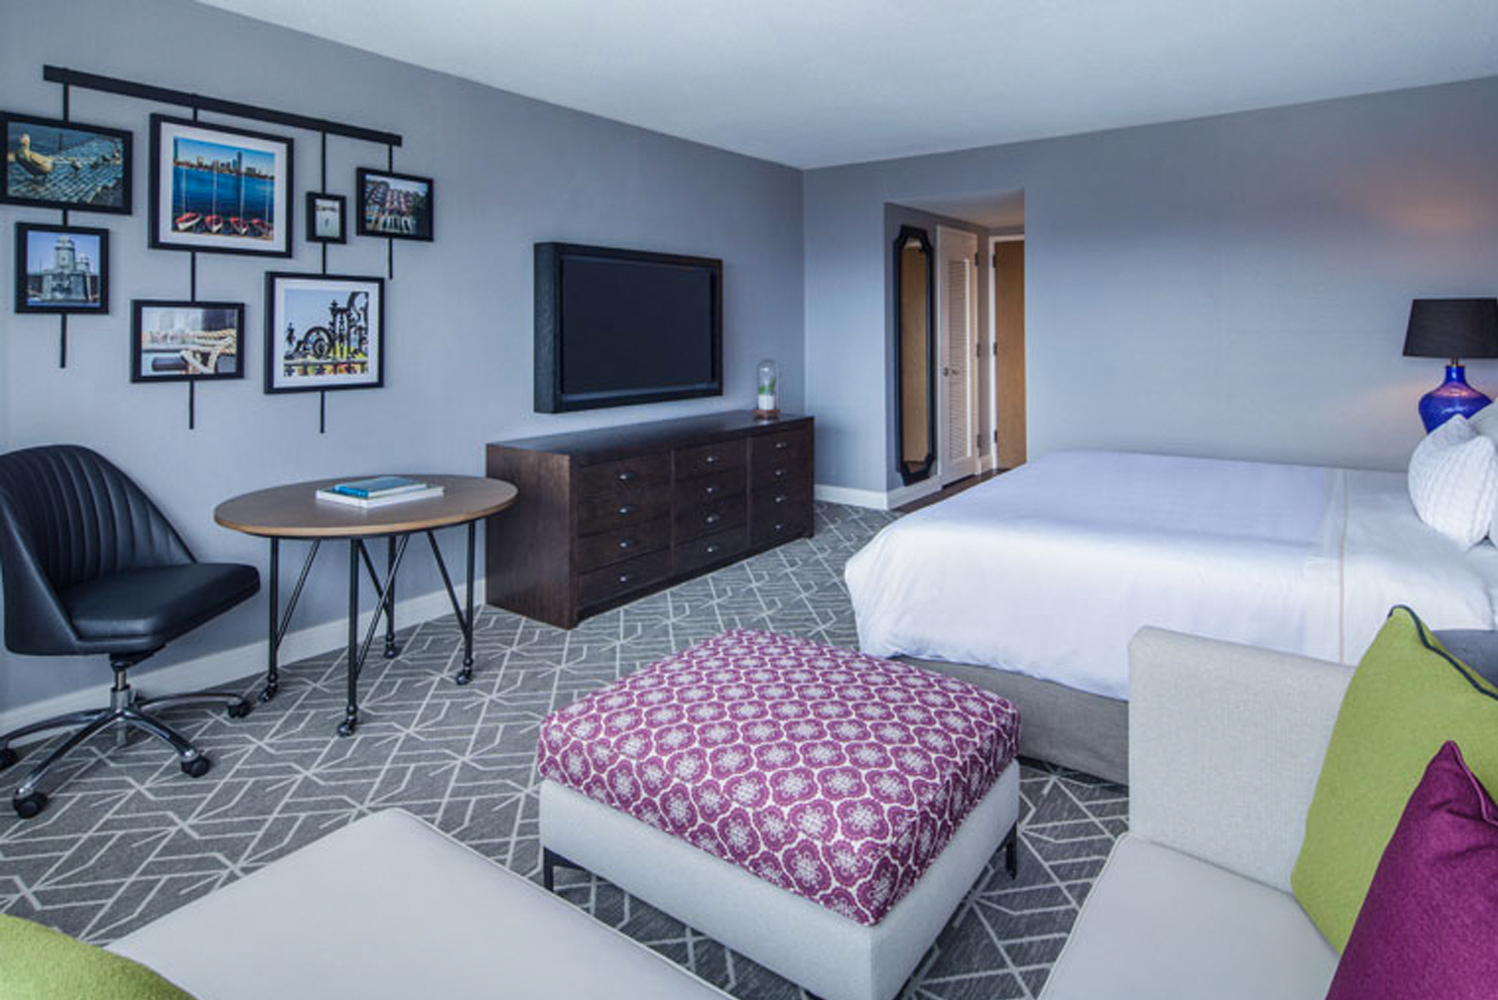 The Westin Copley Place completed the renovation of its rooms and suites 